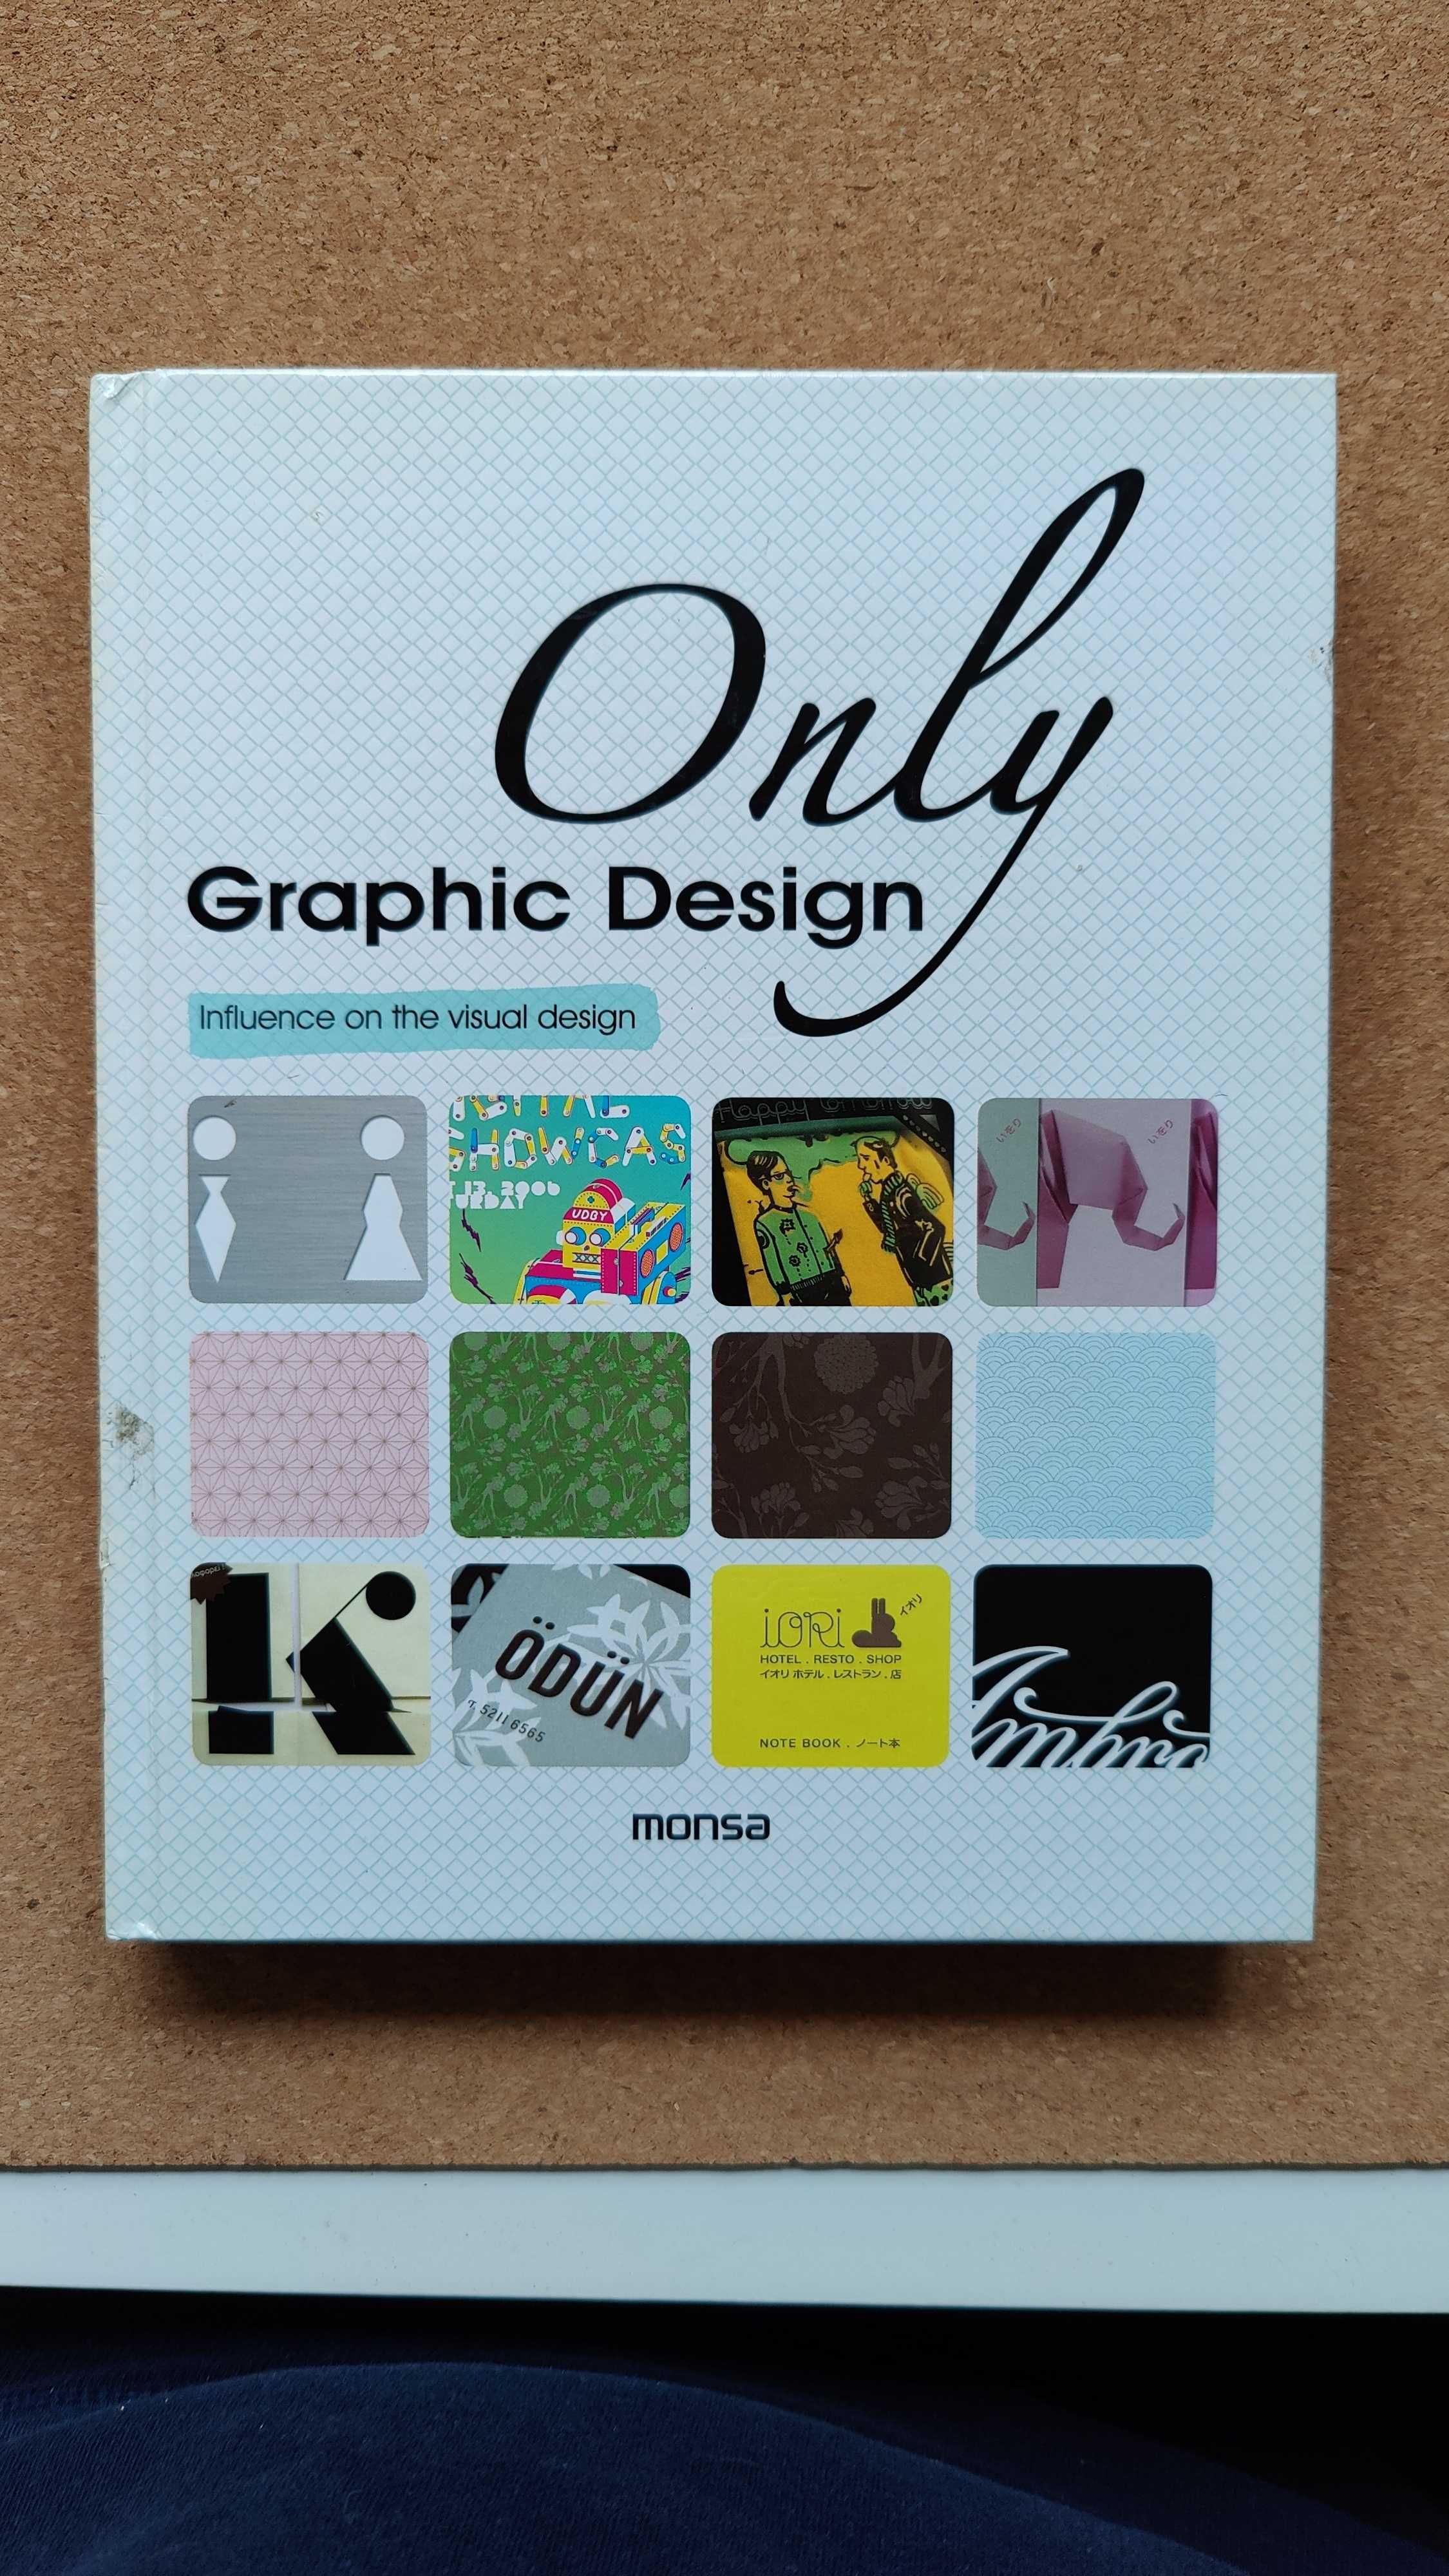 Only Graphic Design: Influence on the visual design